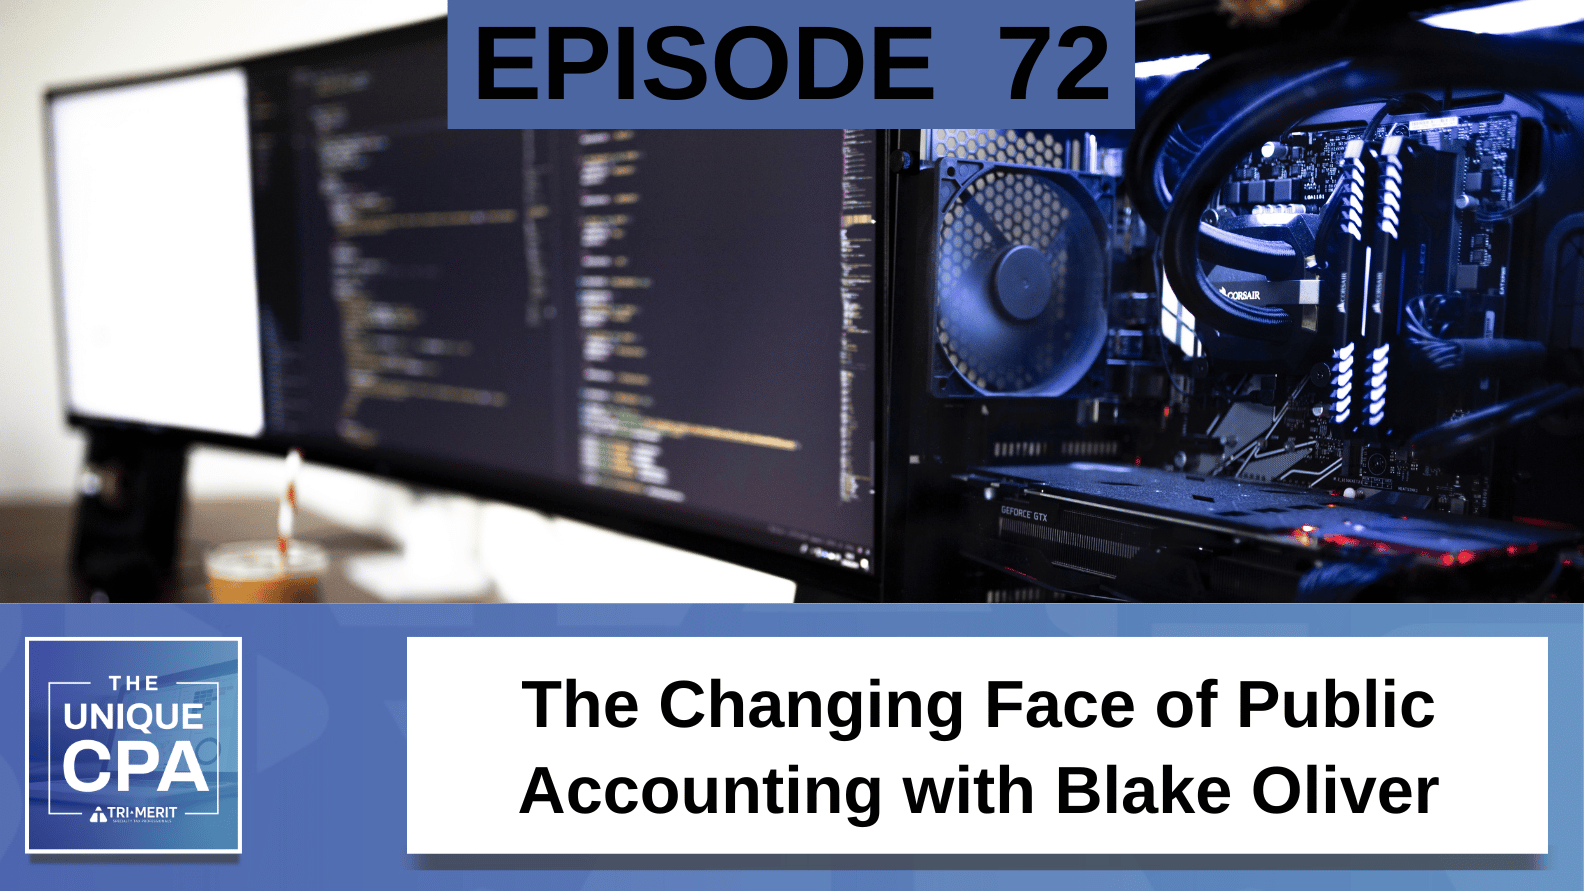 Unique Cpa Featured Image Ep 72 Blake Oliver - The Changing Face Of Public Accounting - Tri-Merit